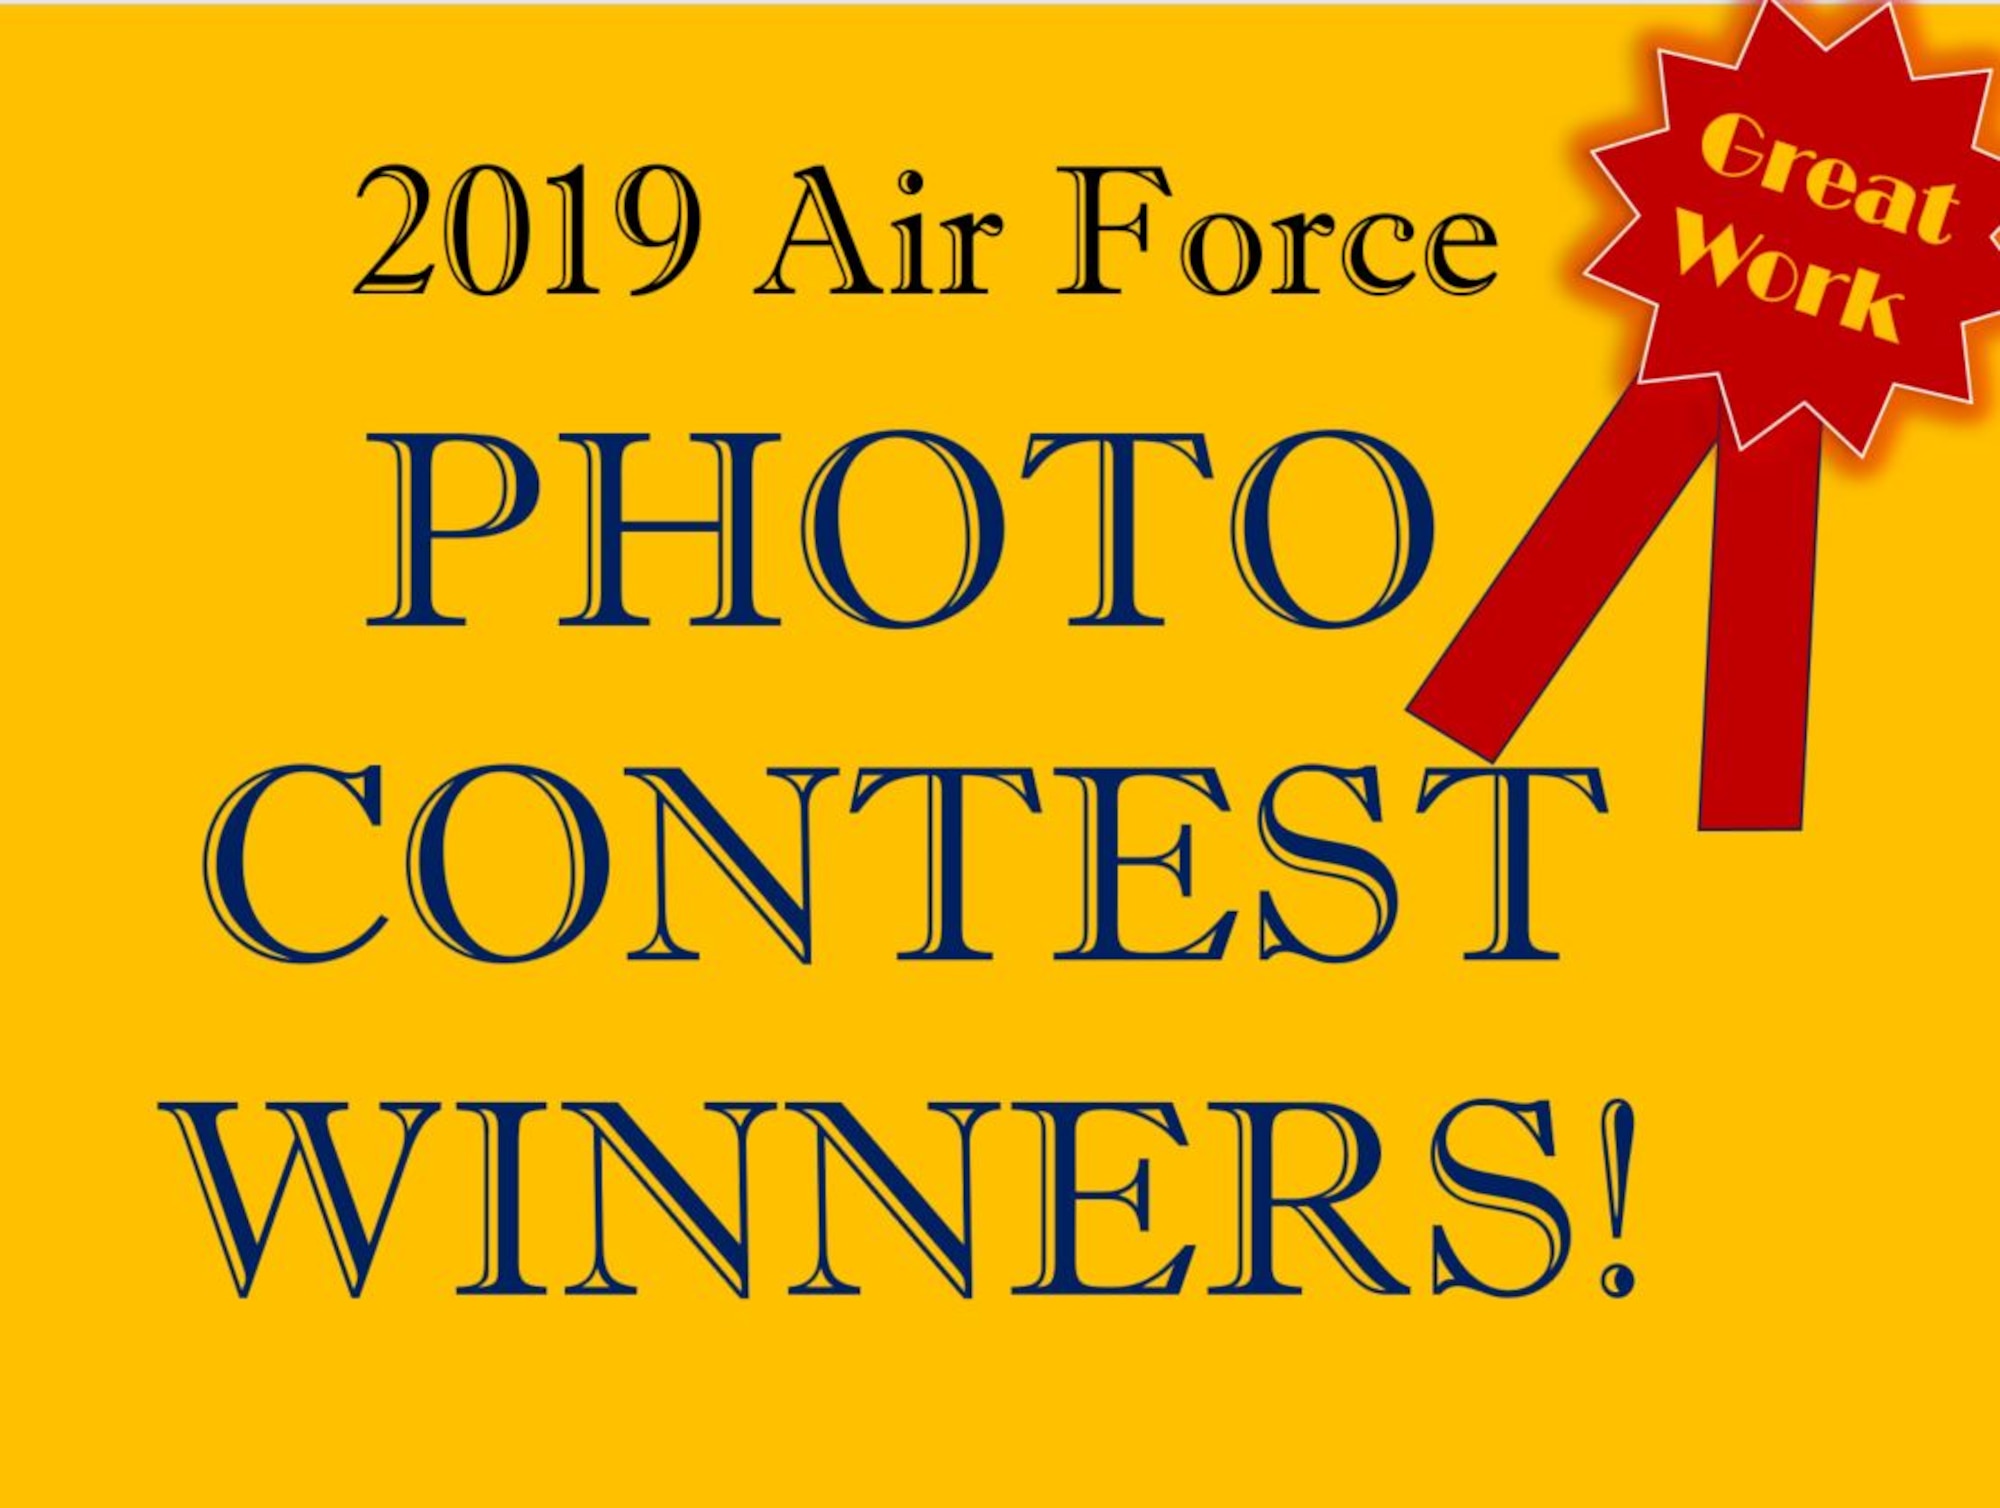 2019 Air Force Photo Contest Winners